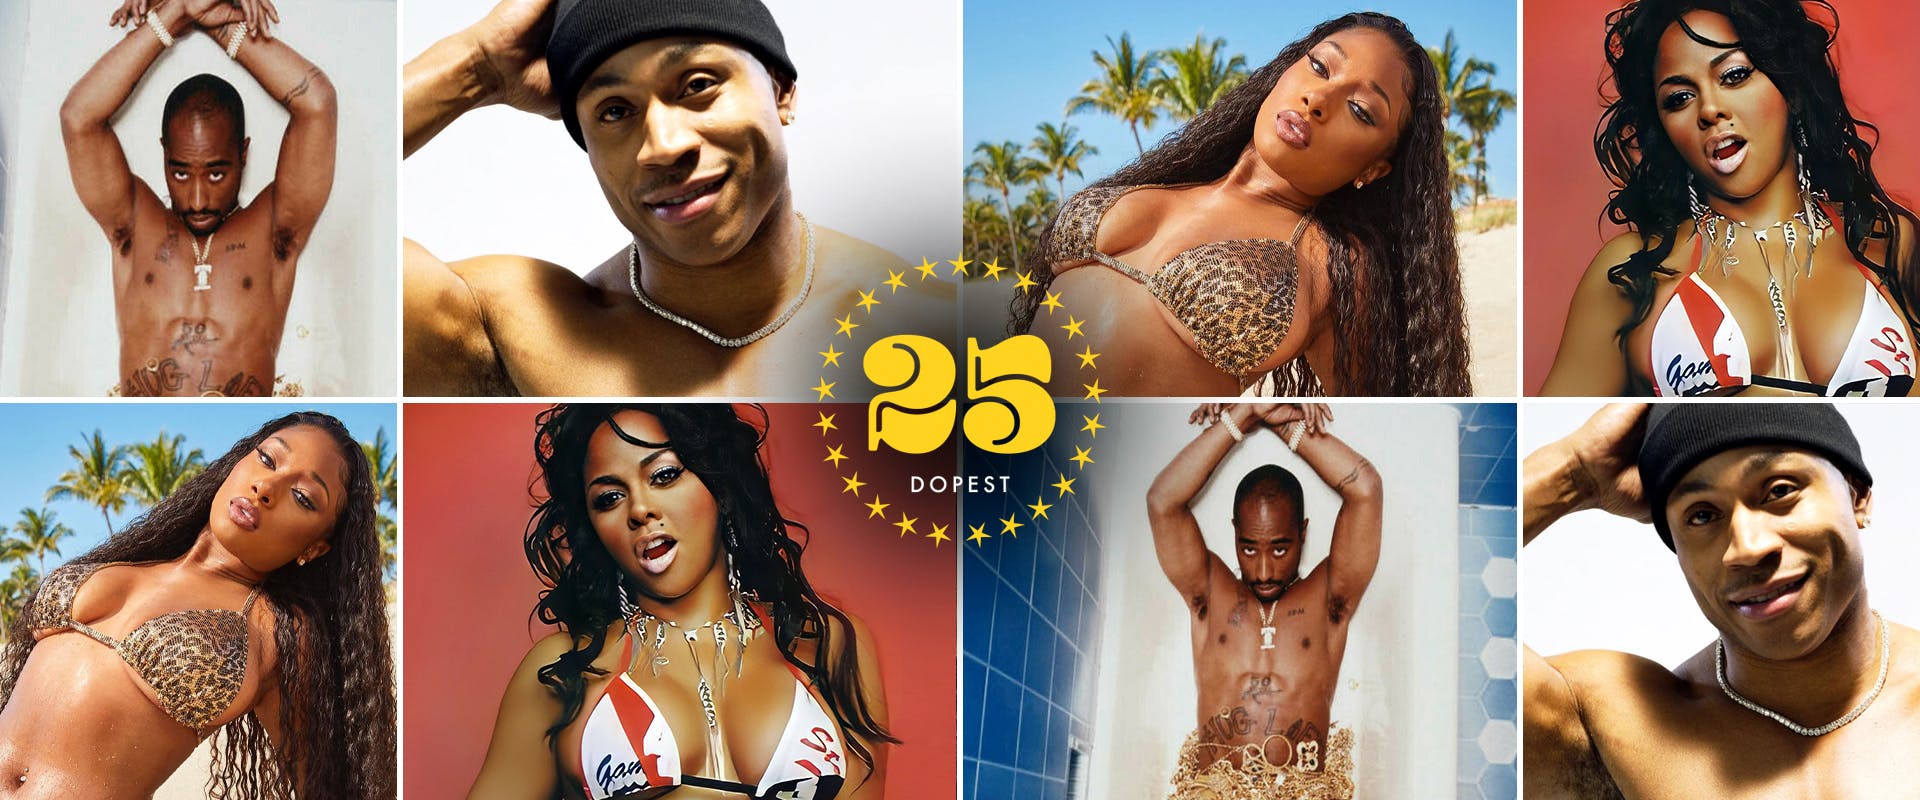 Rap Sexy Video - How Many Licks: The 25 Dopest Rap Songs to F*** To